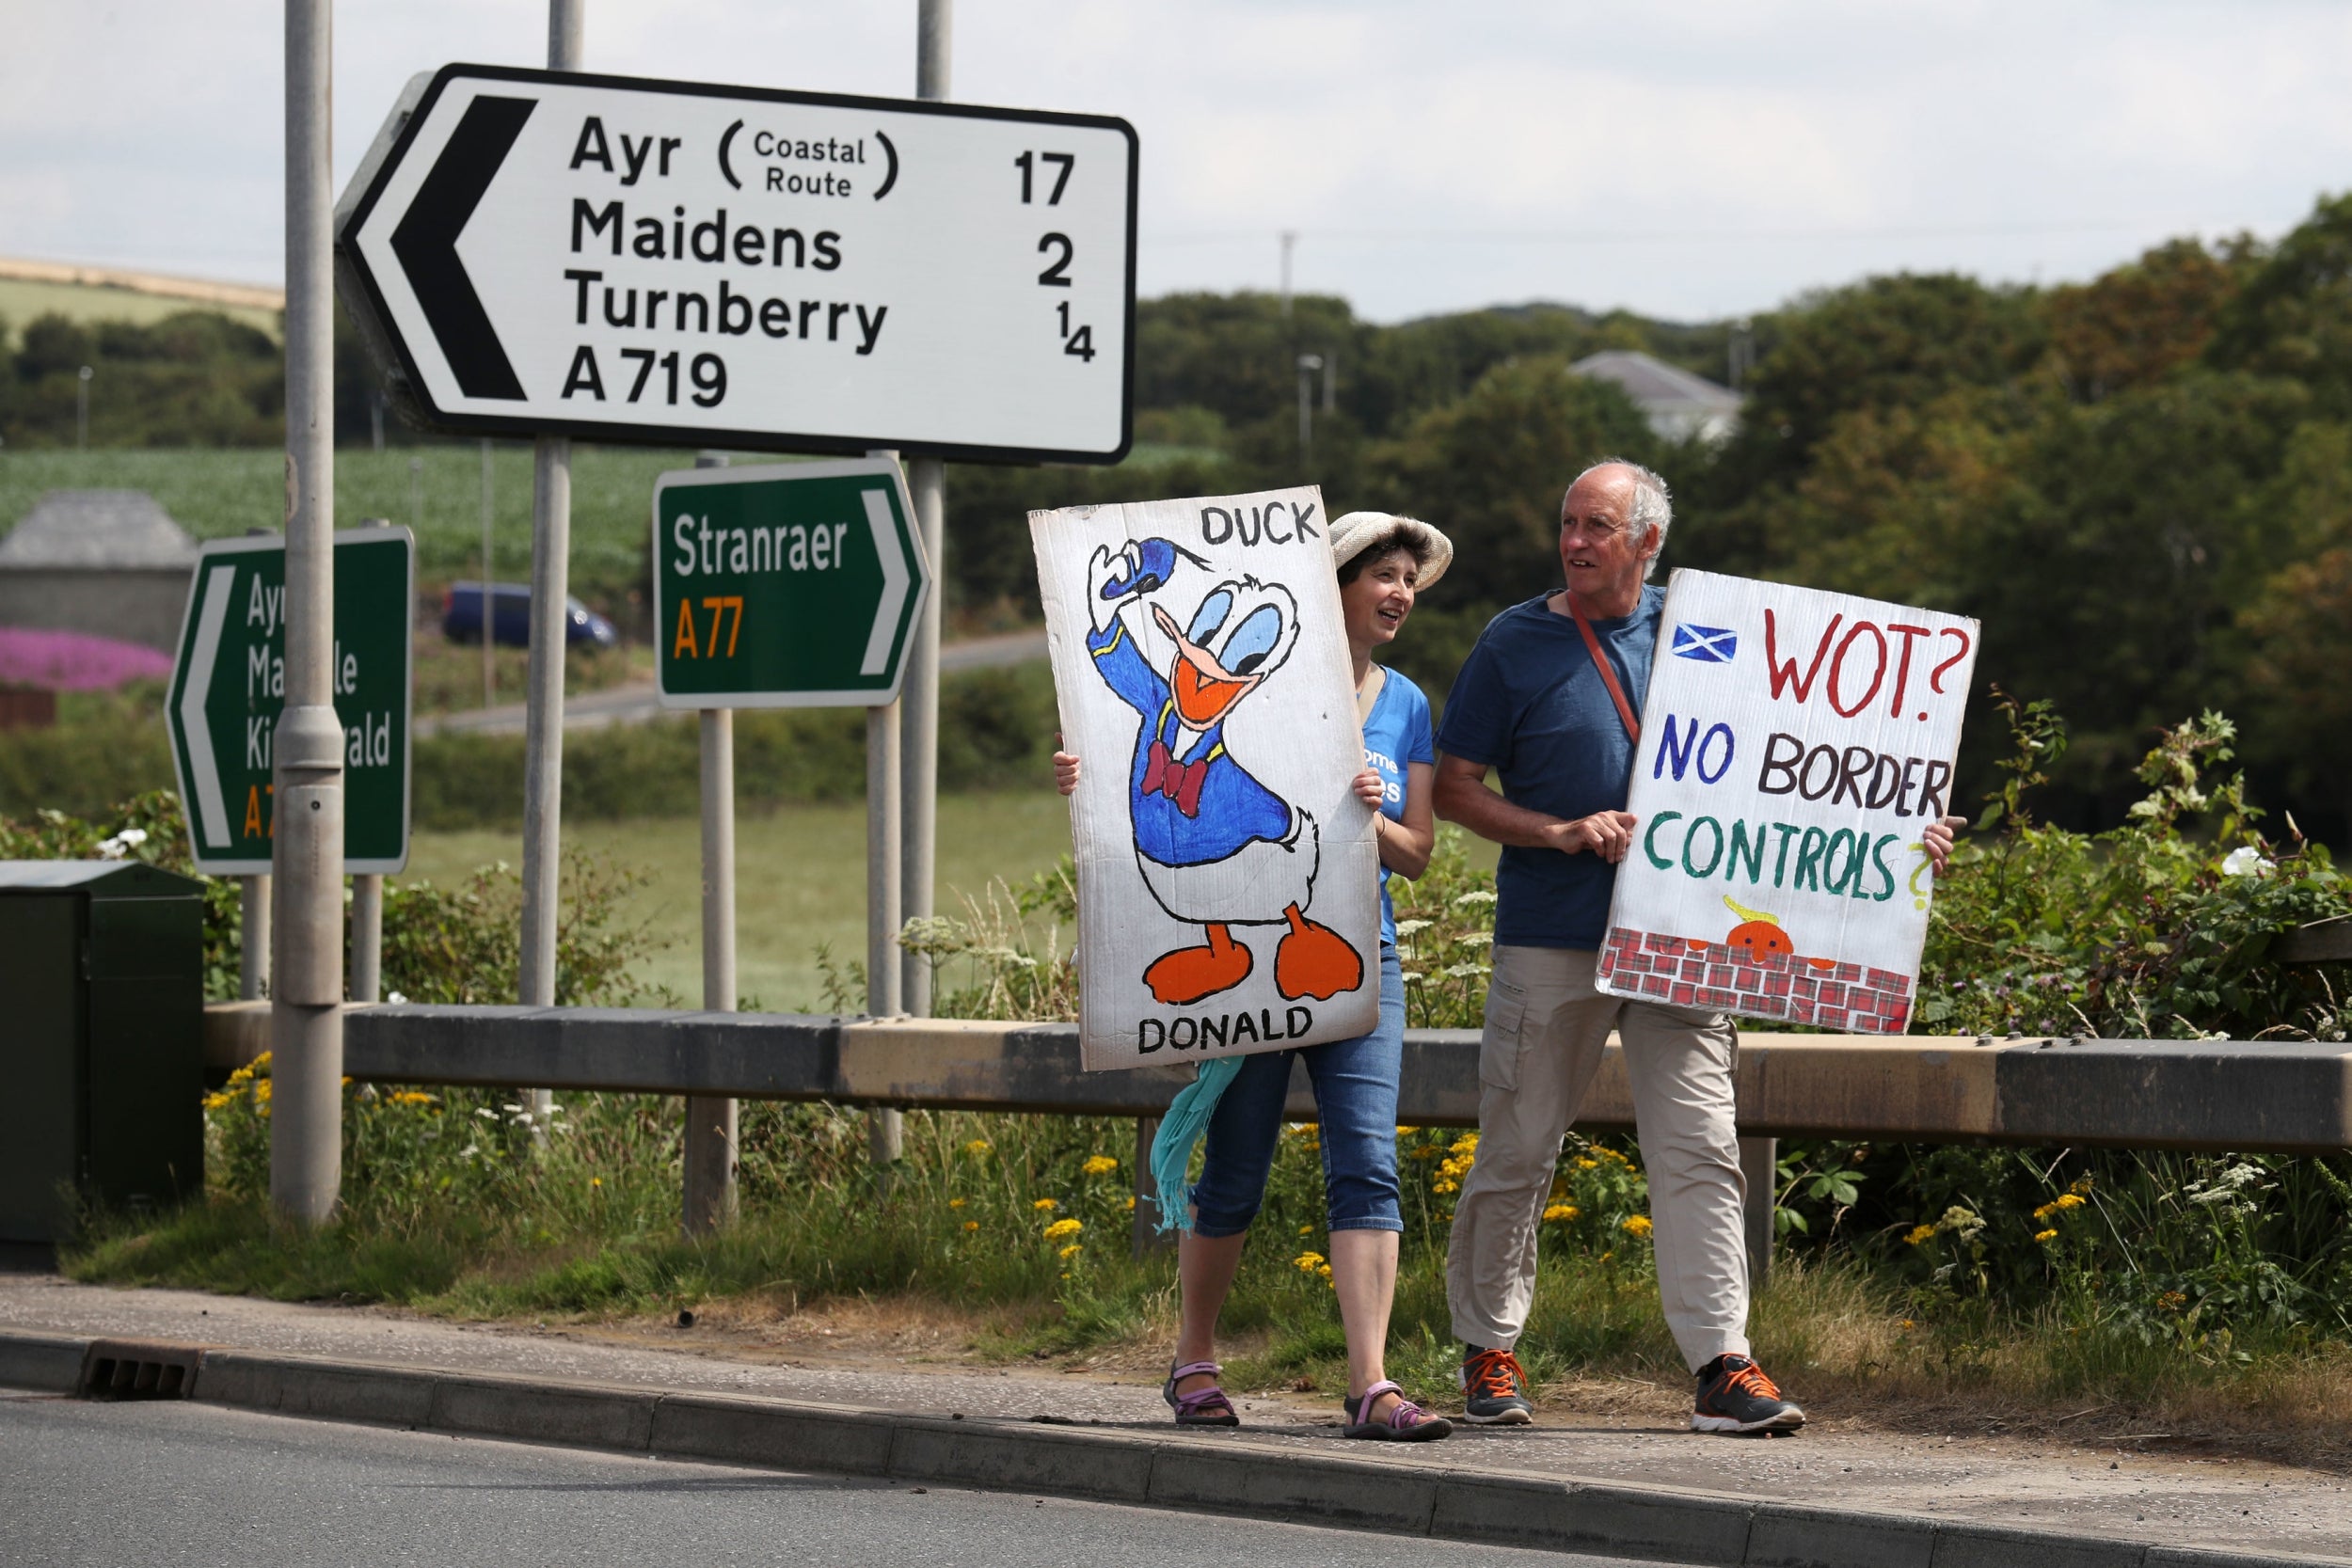 Protesters await Trump’s arrival near to his golf course at Turnberry, Ayrshire